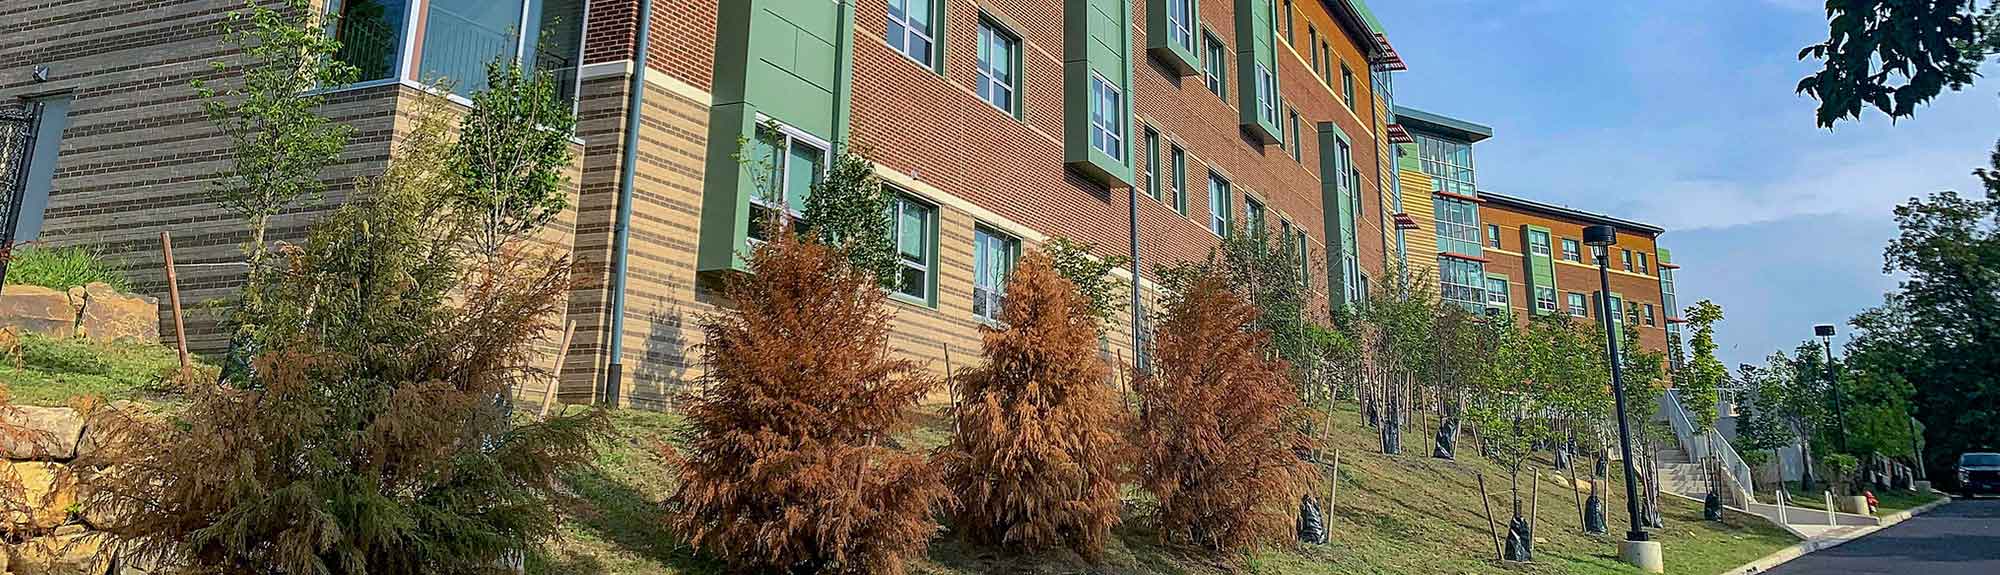 Campus Housing Residence Life William Paterson University 4567